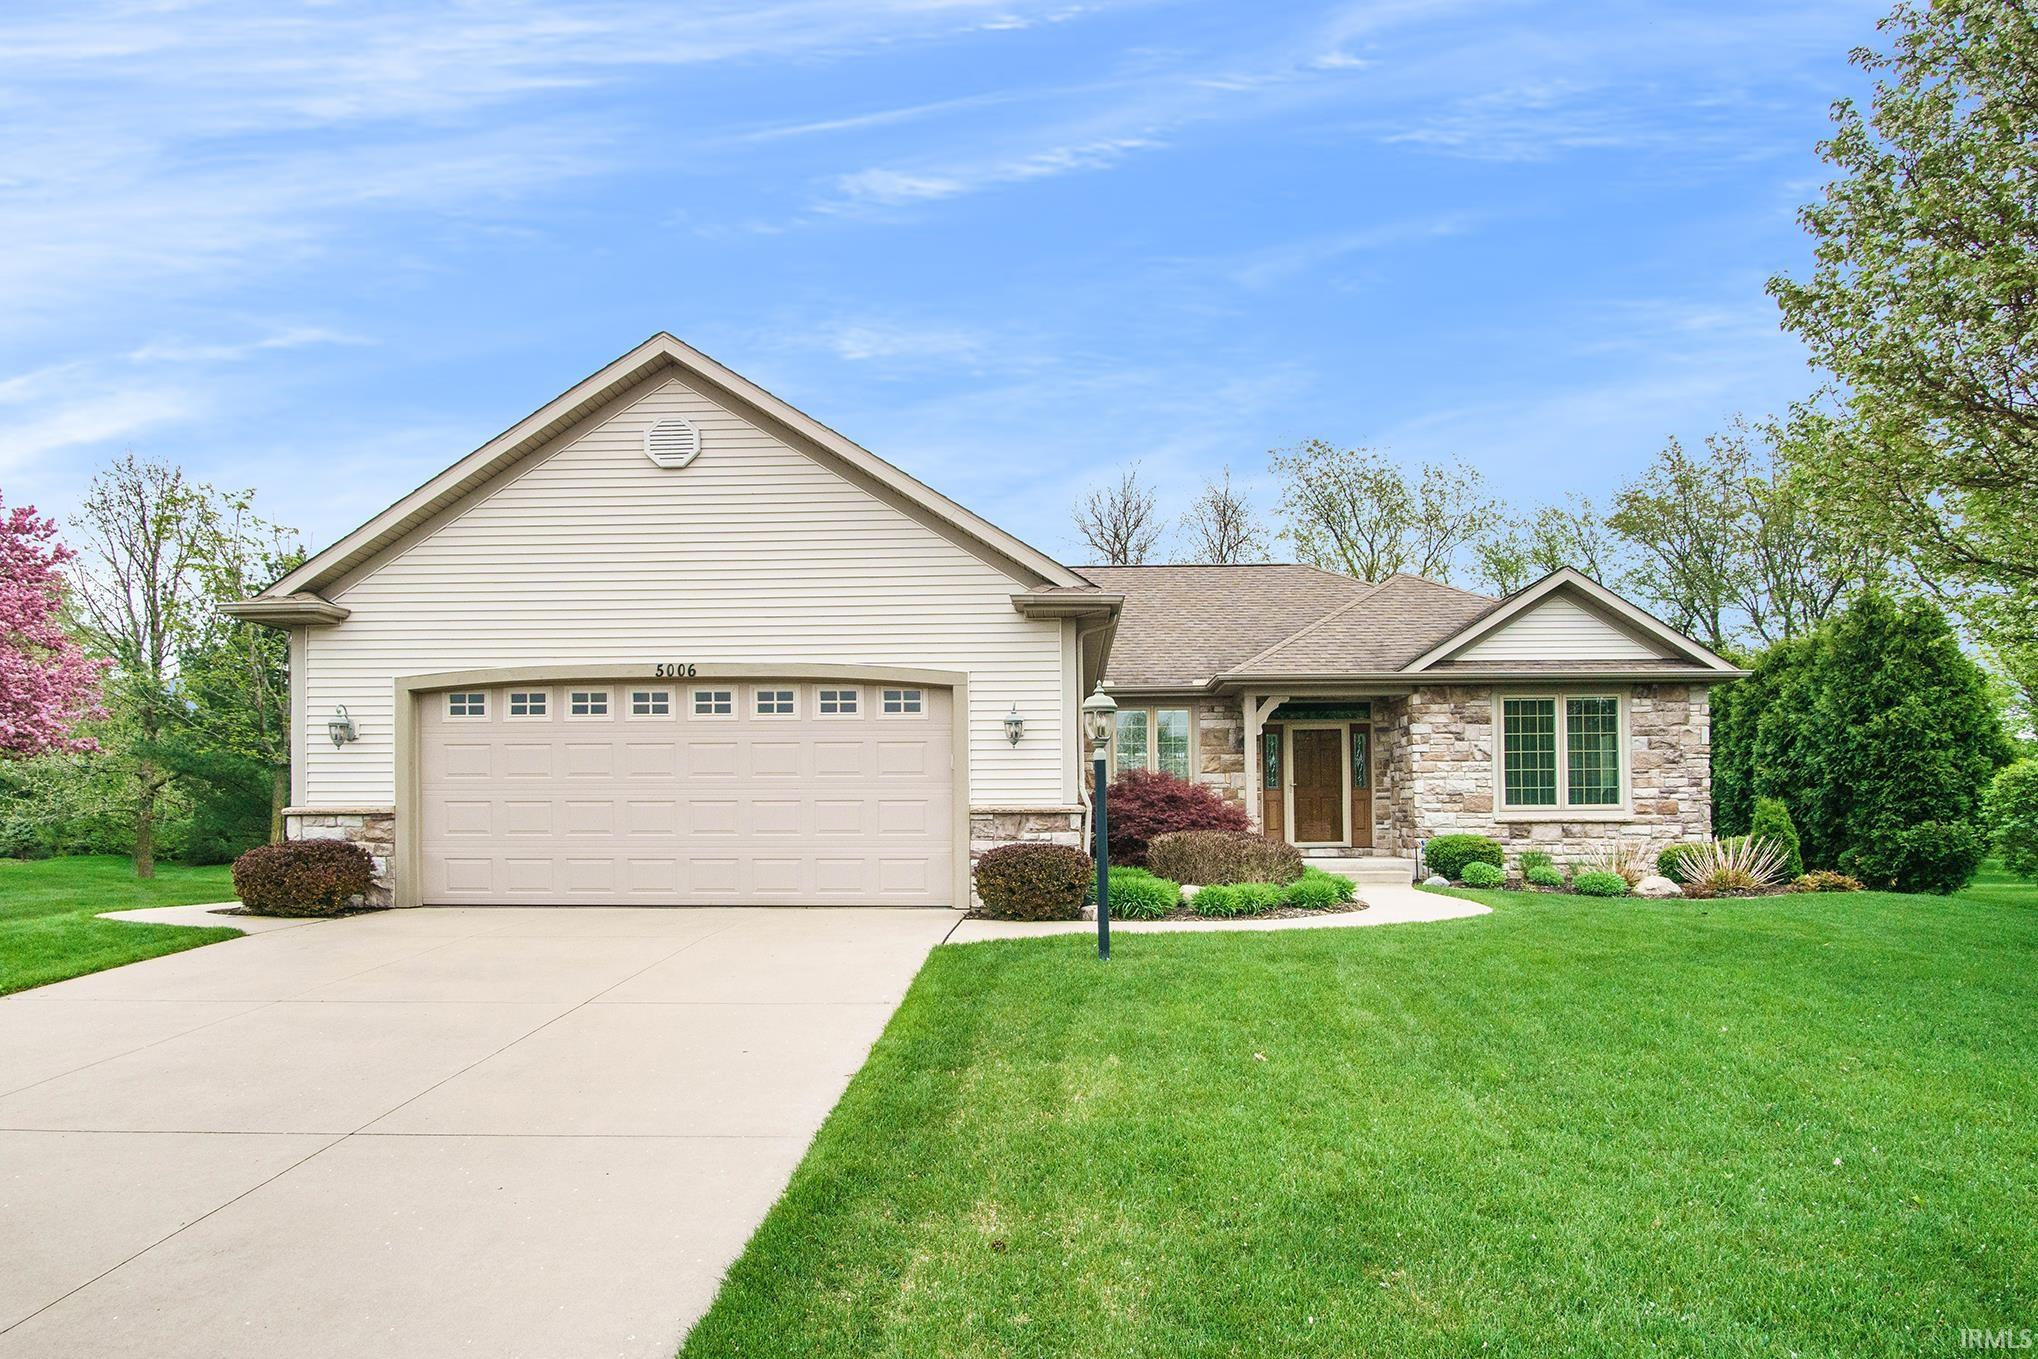 5006 Masthead Court, South Bend, IN 46628